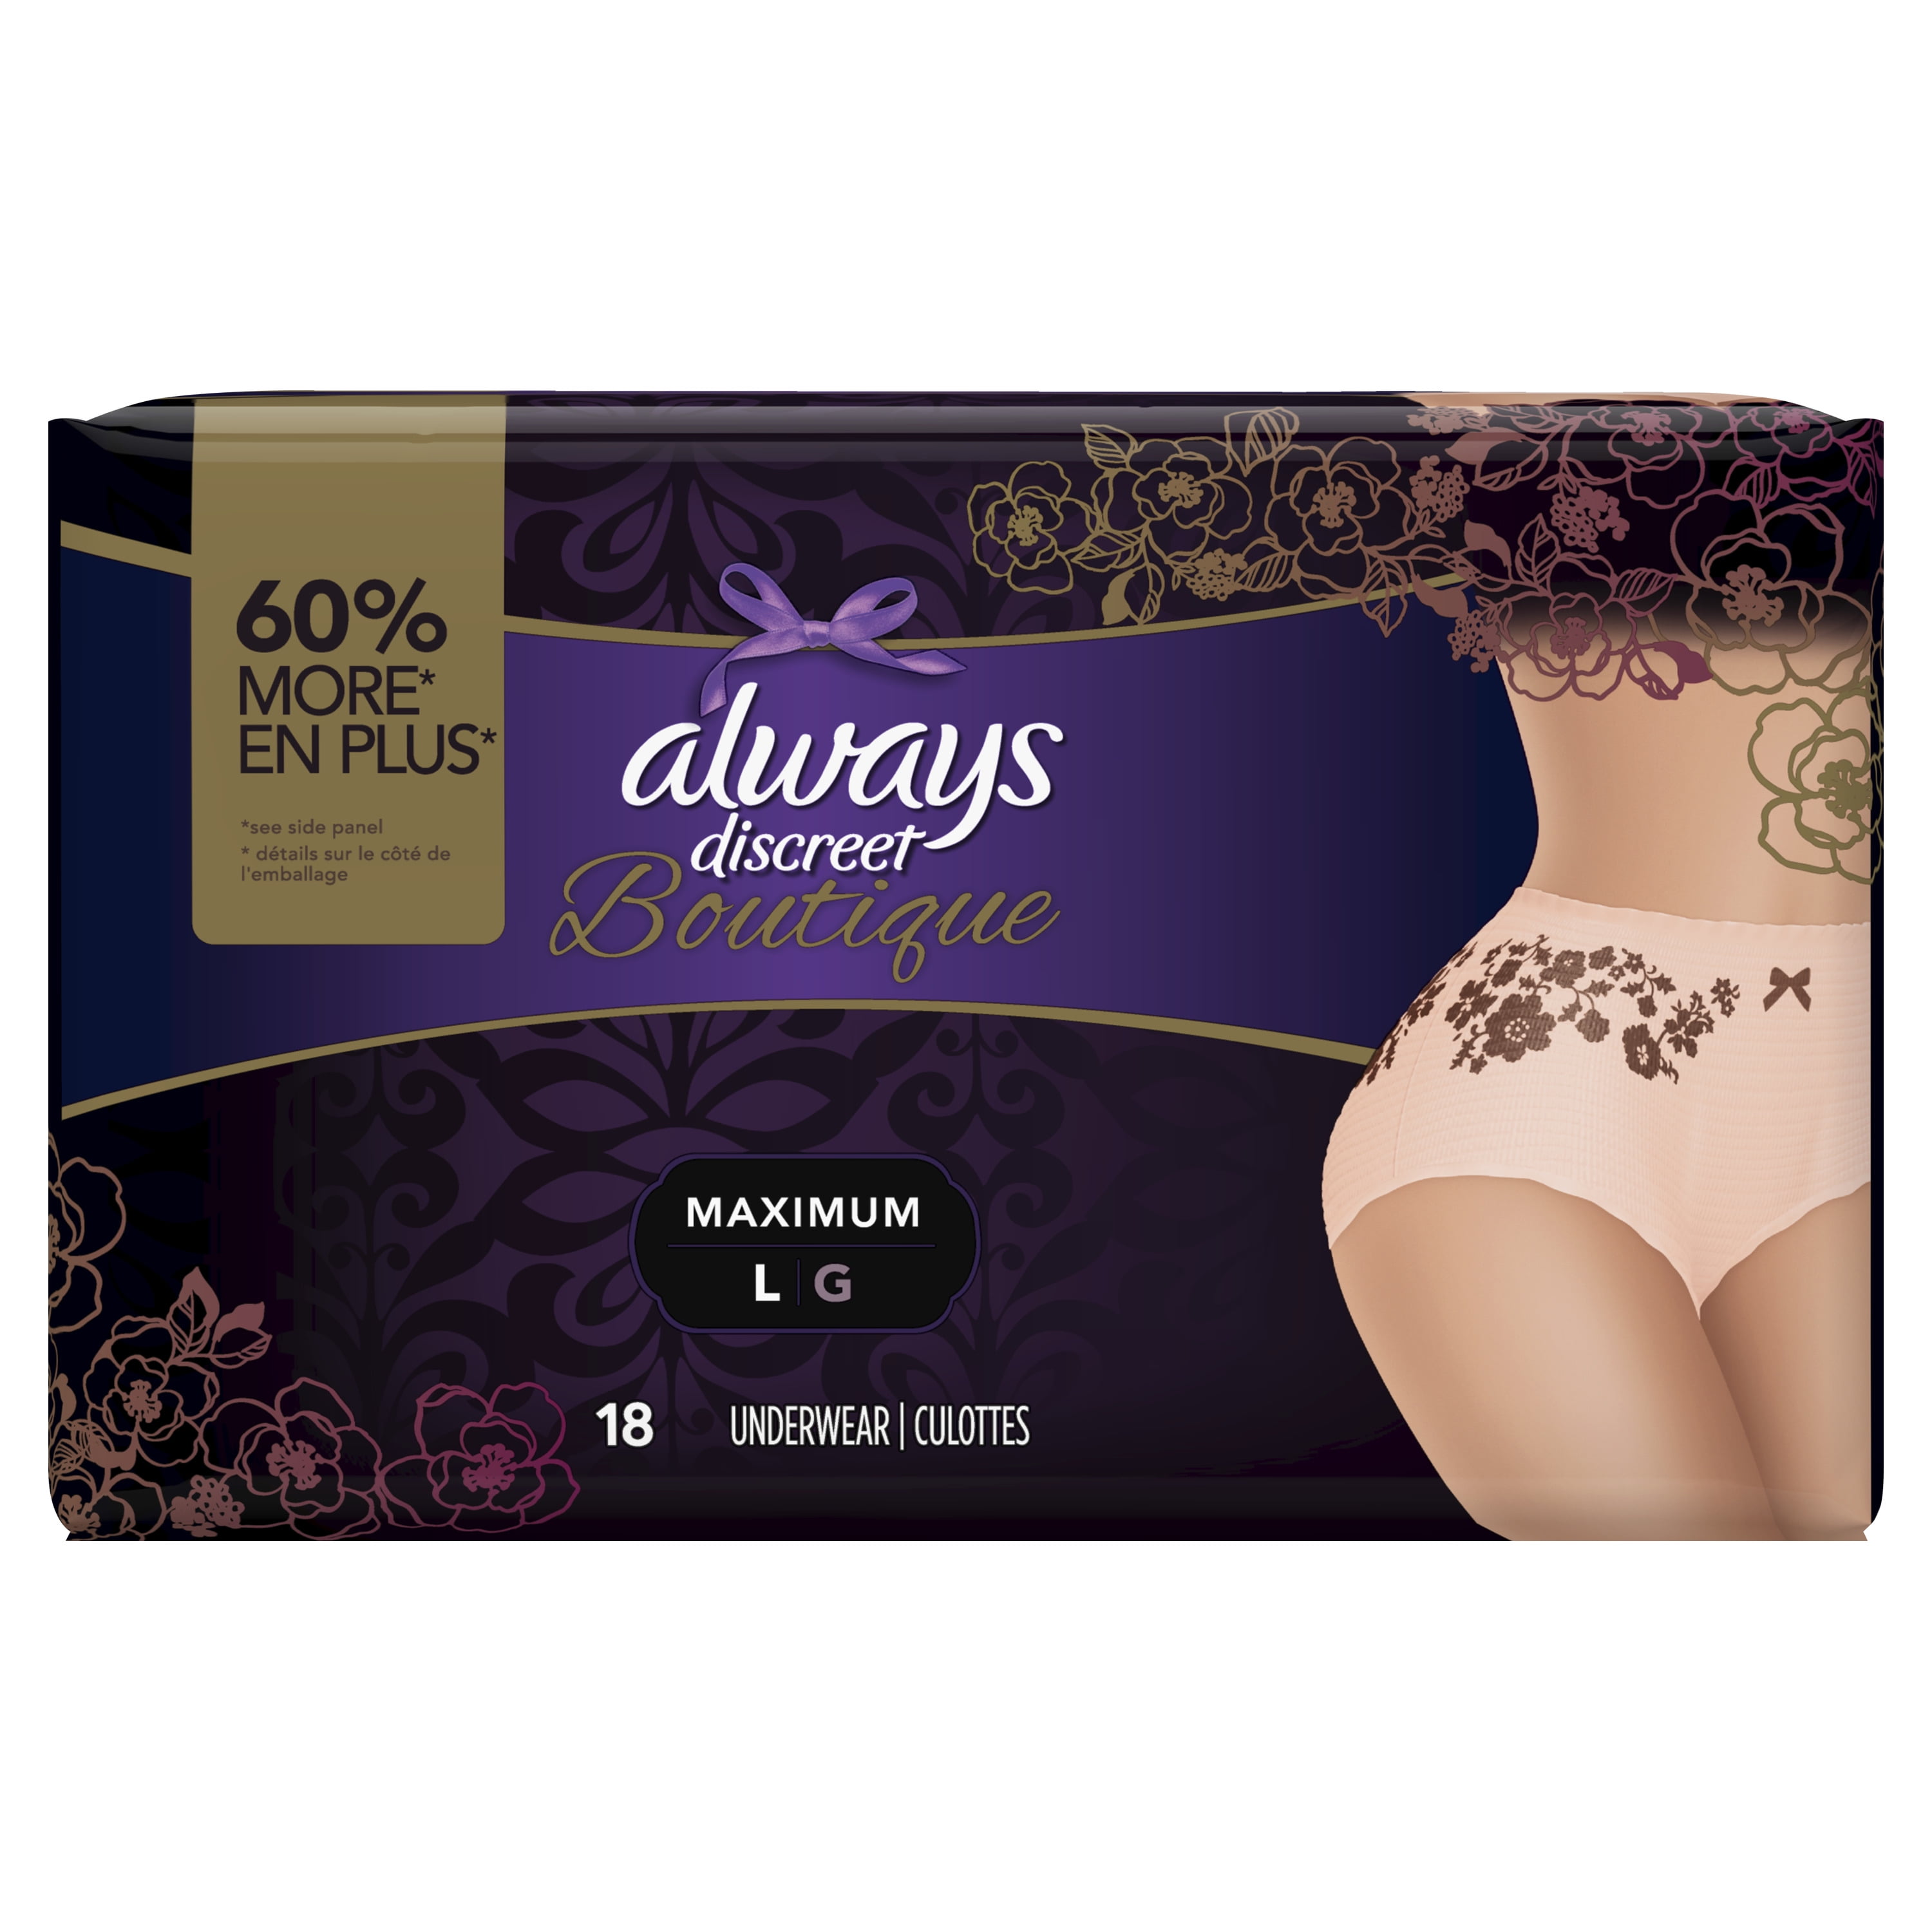  Always Discreet Boutique Adult Incontinence